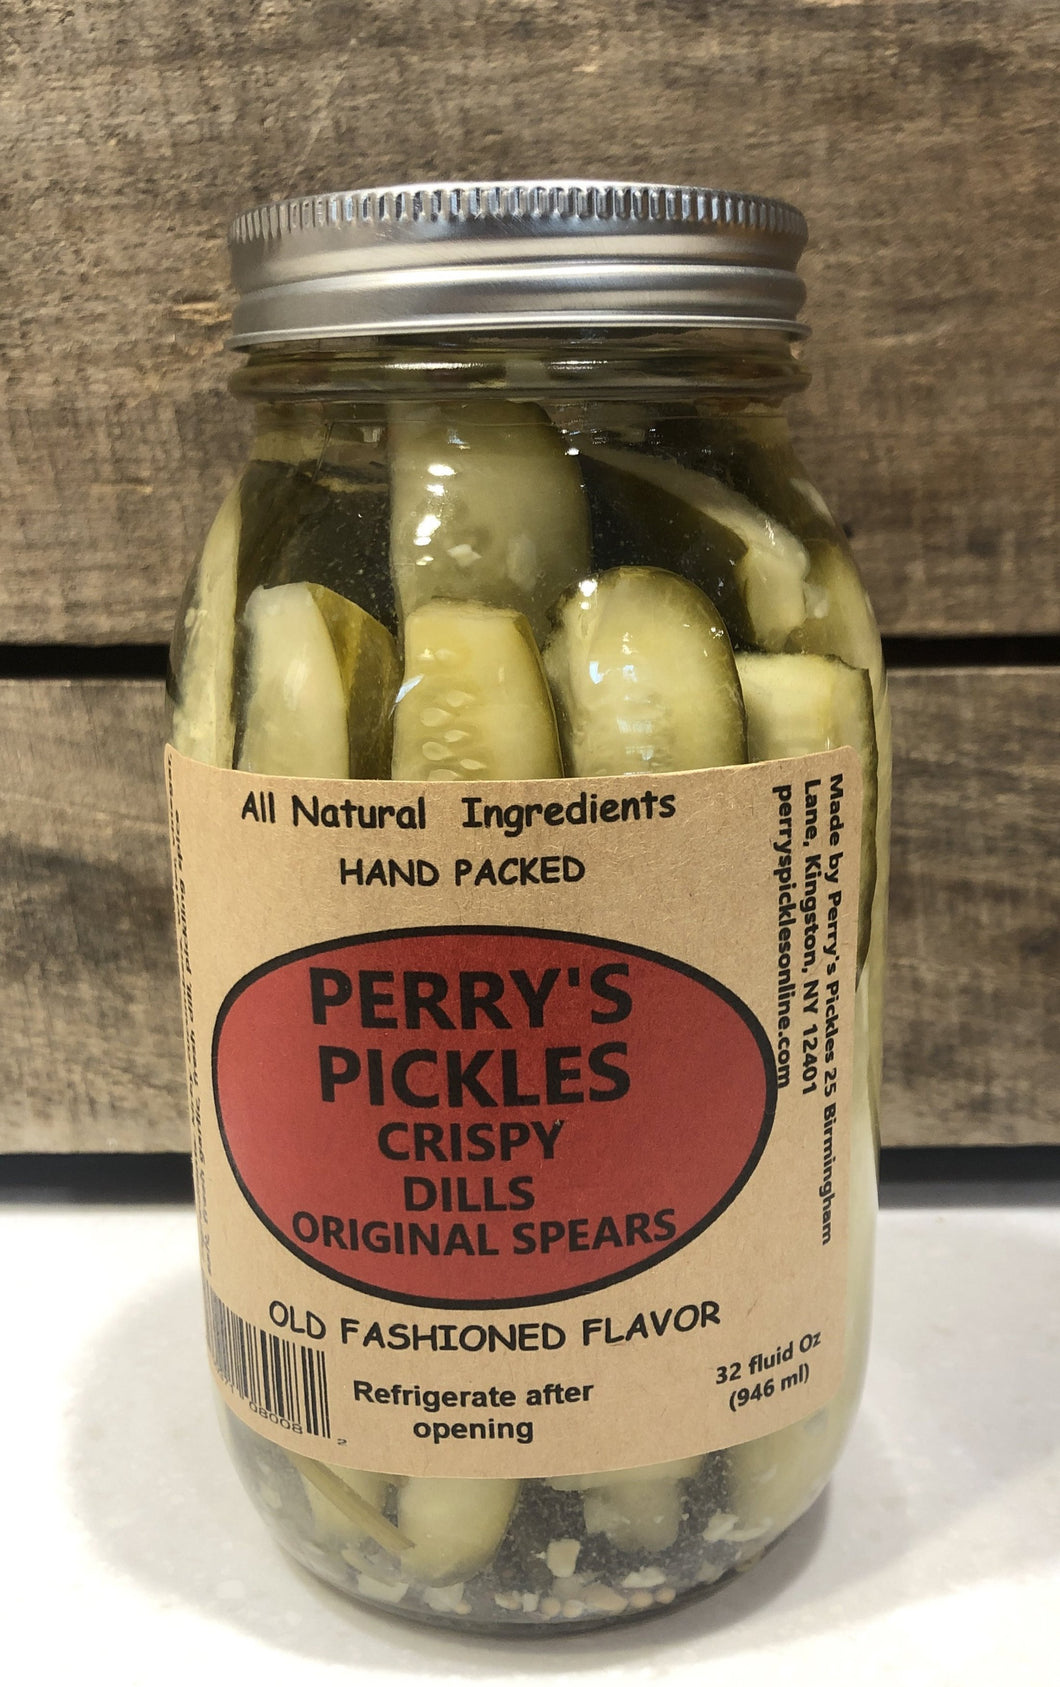 This classic dill pickle is as crunchy as you will find in any supermarket.  Tall spears stay firm, with mouth-watering acidity, dill and garlic.  A main stay for any pantry. Produced in Rosendale, New York with fresh ingredients, using local produce in season.  Shelf stable until opened; refrigerate after opening. Thirty two ounce  glass jar, heat sealed in canning process.